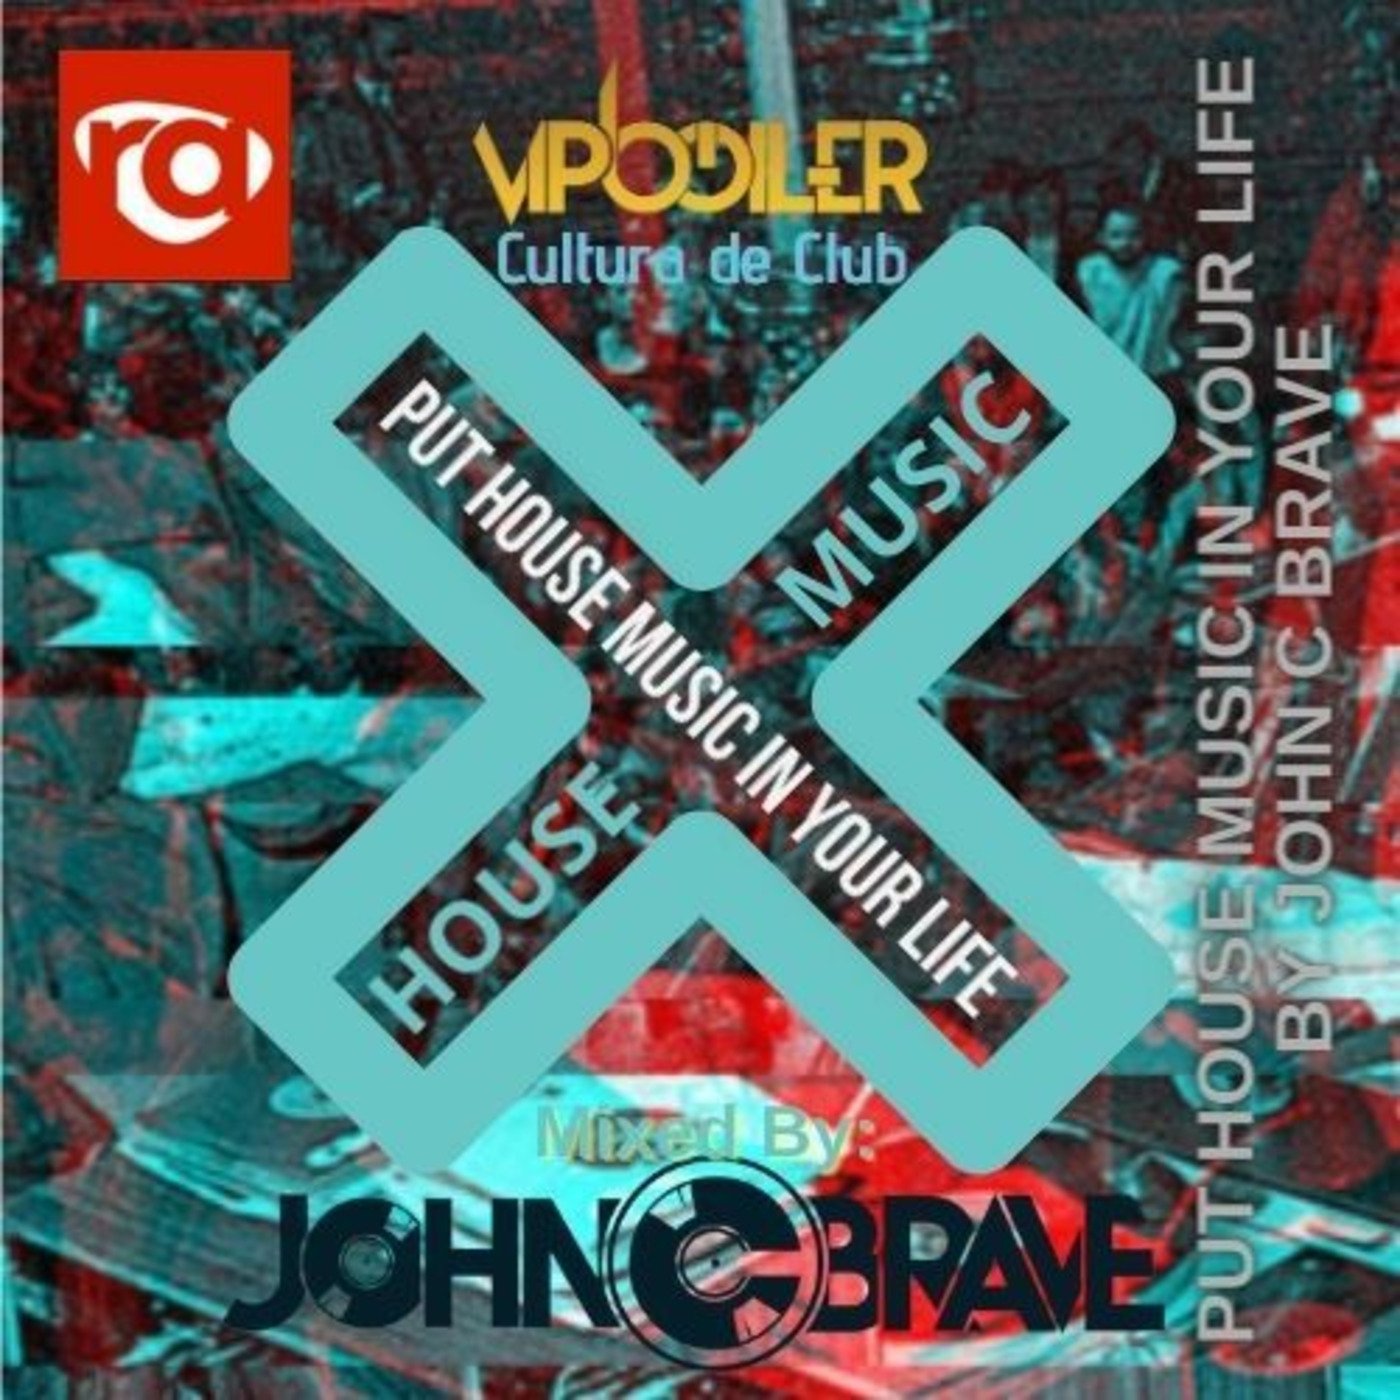 221 PUT HOUSE MUSIC IN YOUR LIFE BY JOHN C BRAVE SZONA DJ 10 02 2024